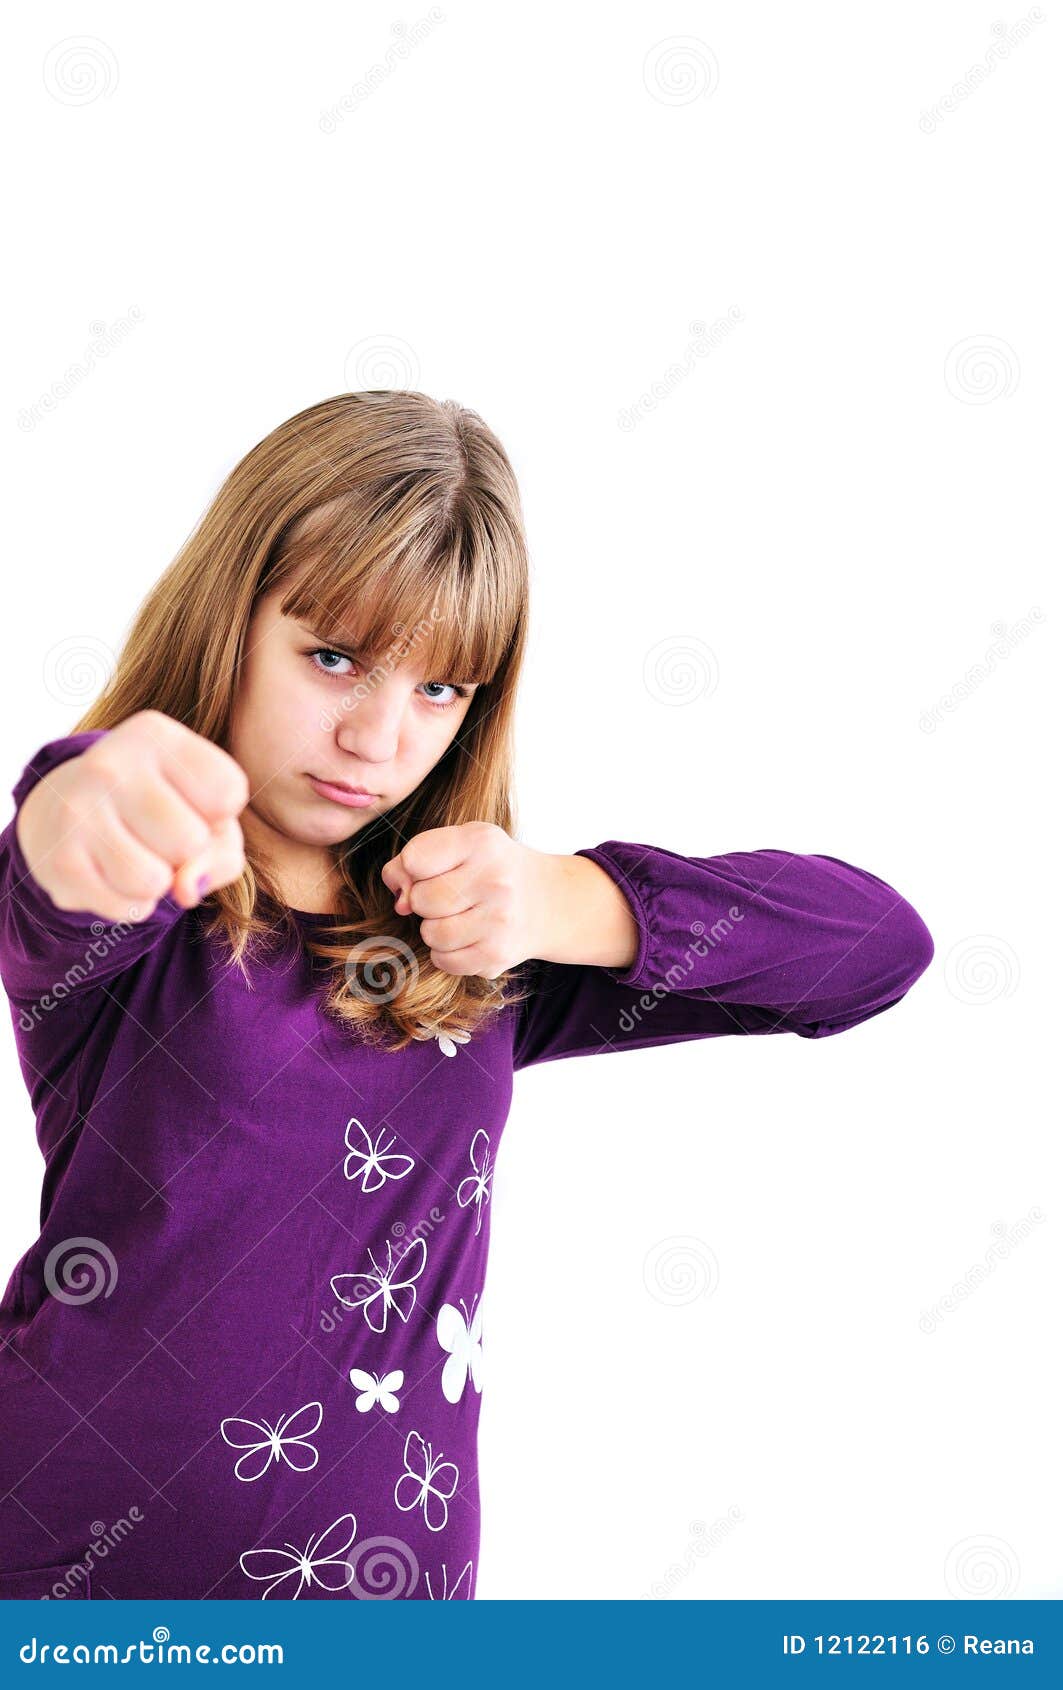 Fighting teen girl stock photo. Image of excited, background - 12122116